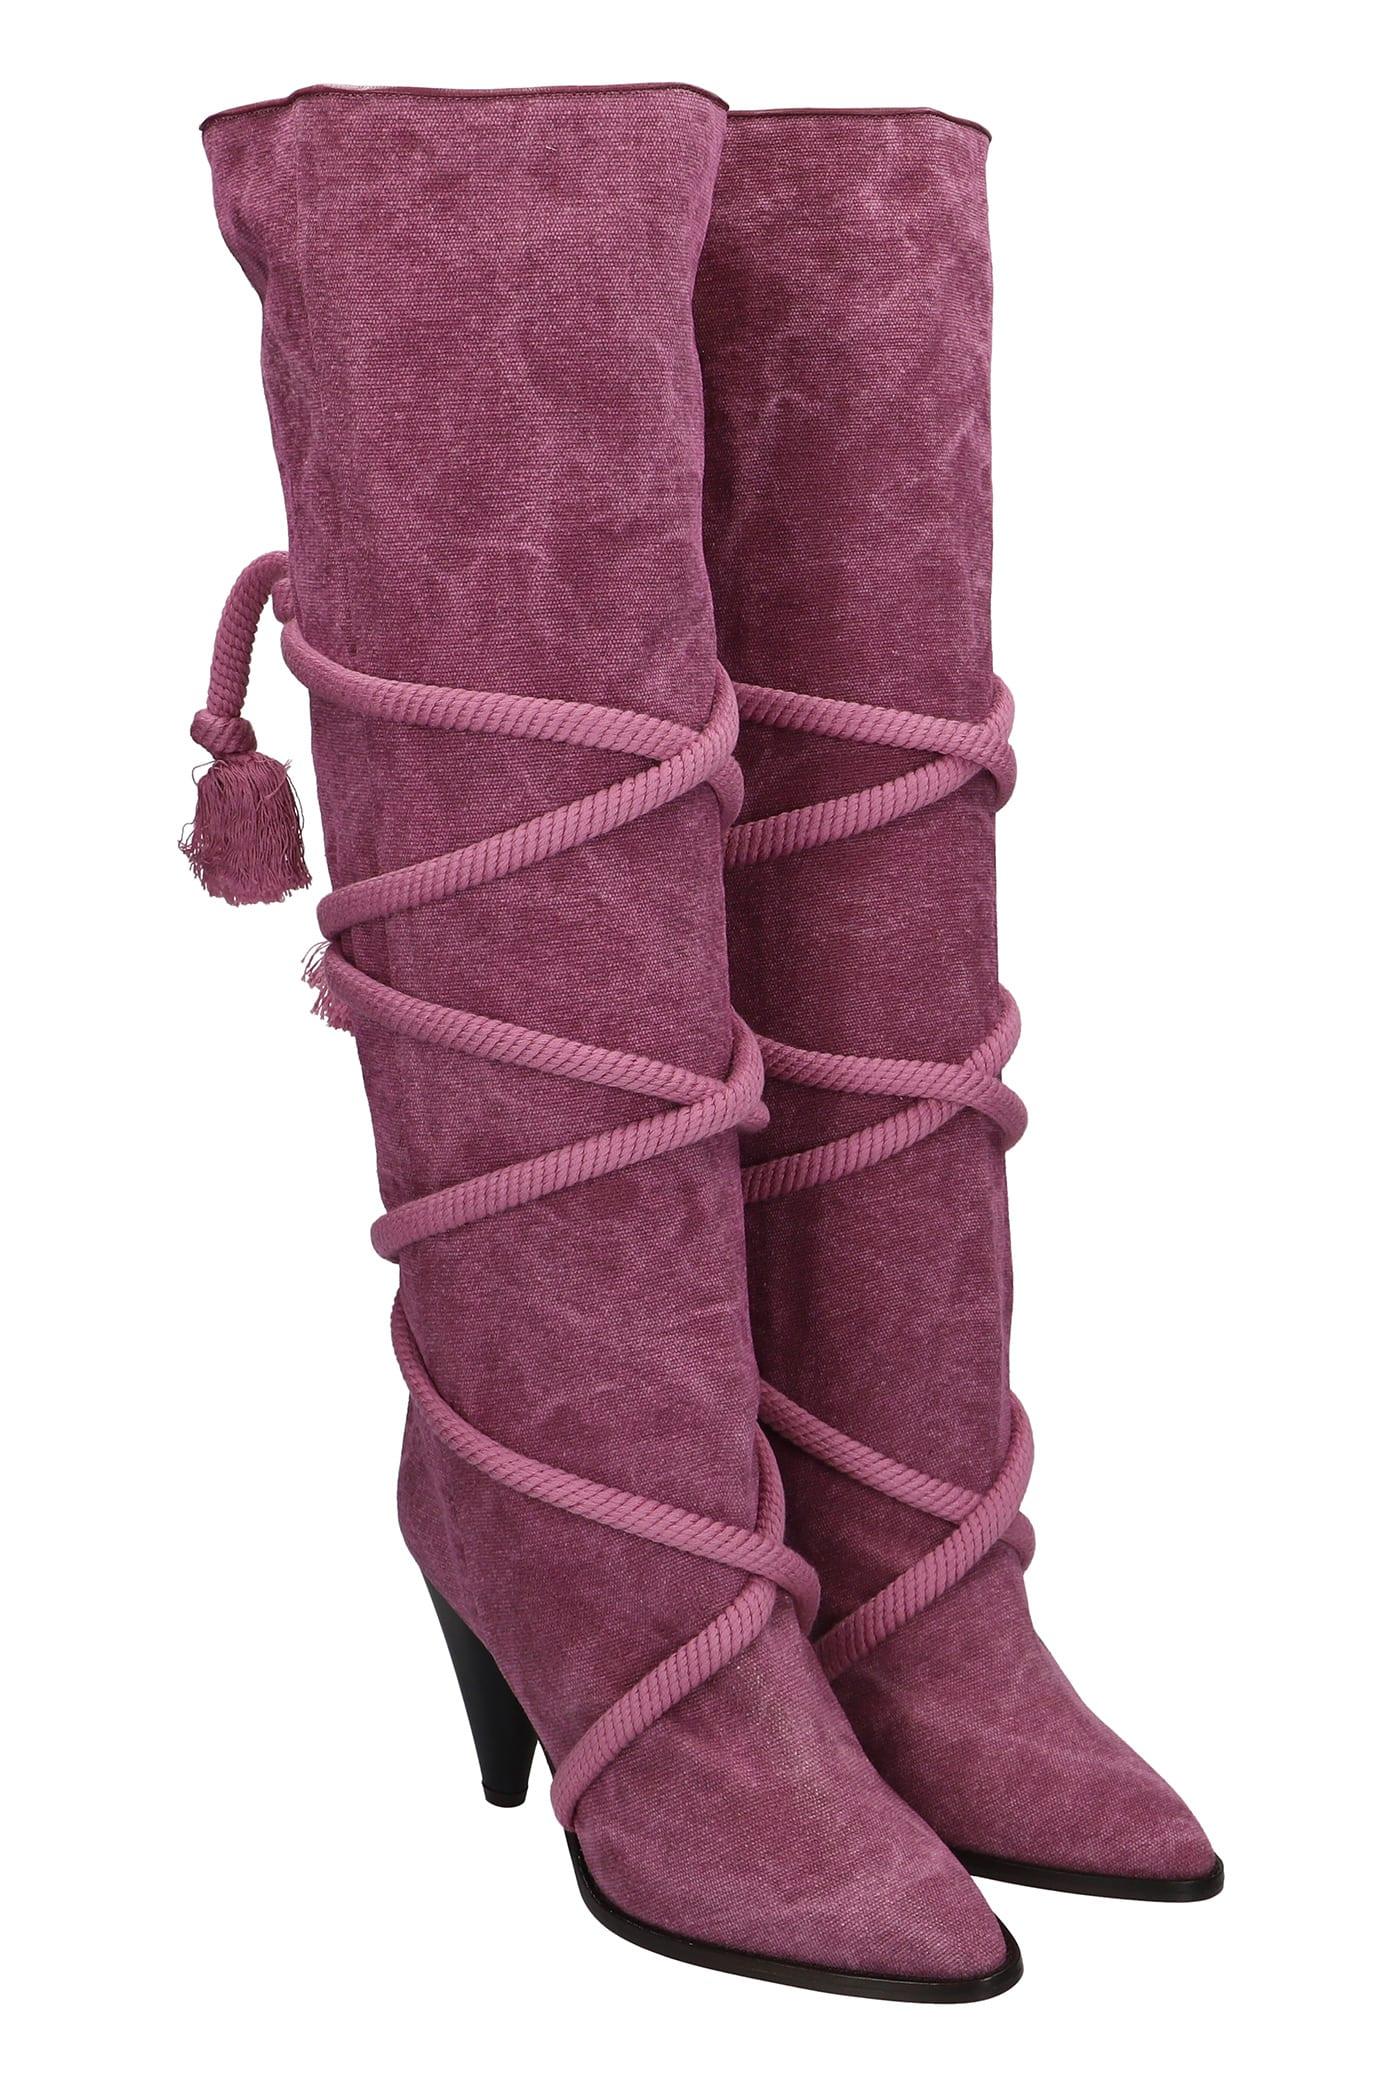 Isabel Marant Lophie High Heels Boots In Canvas in Purple | Lyst